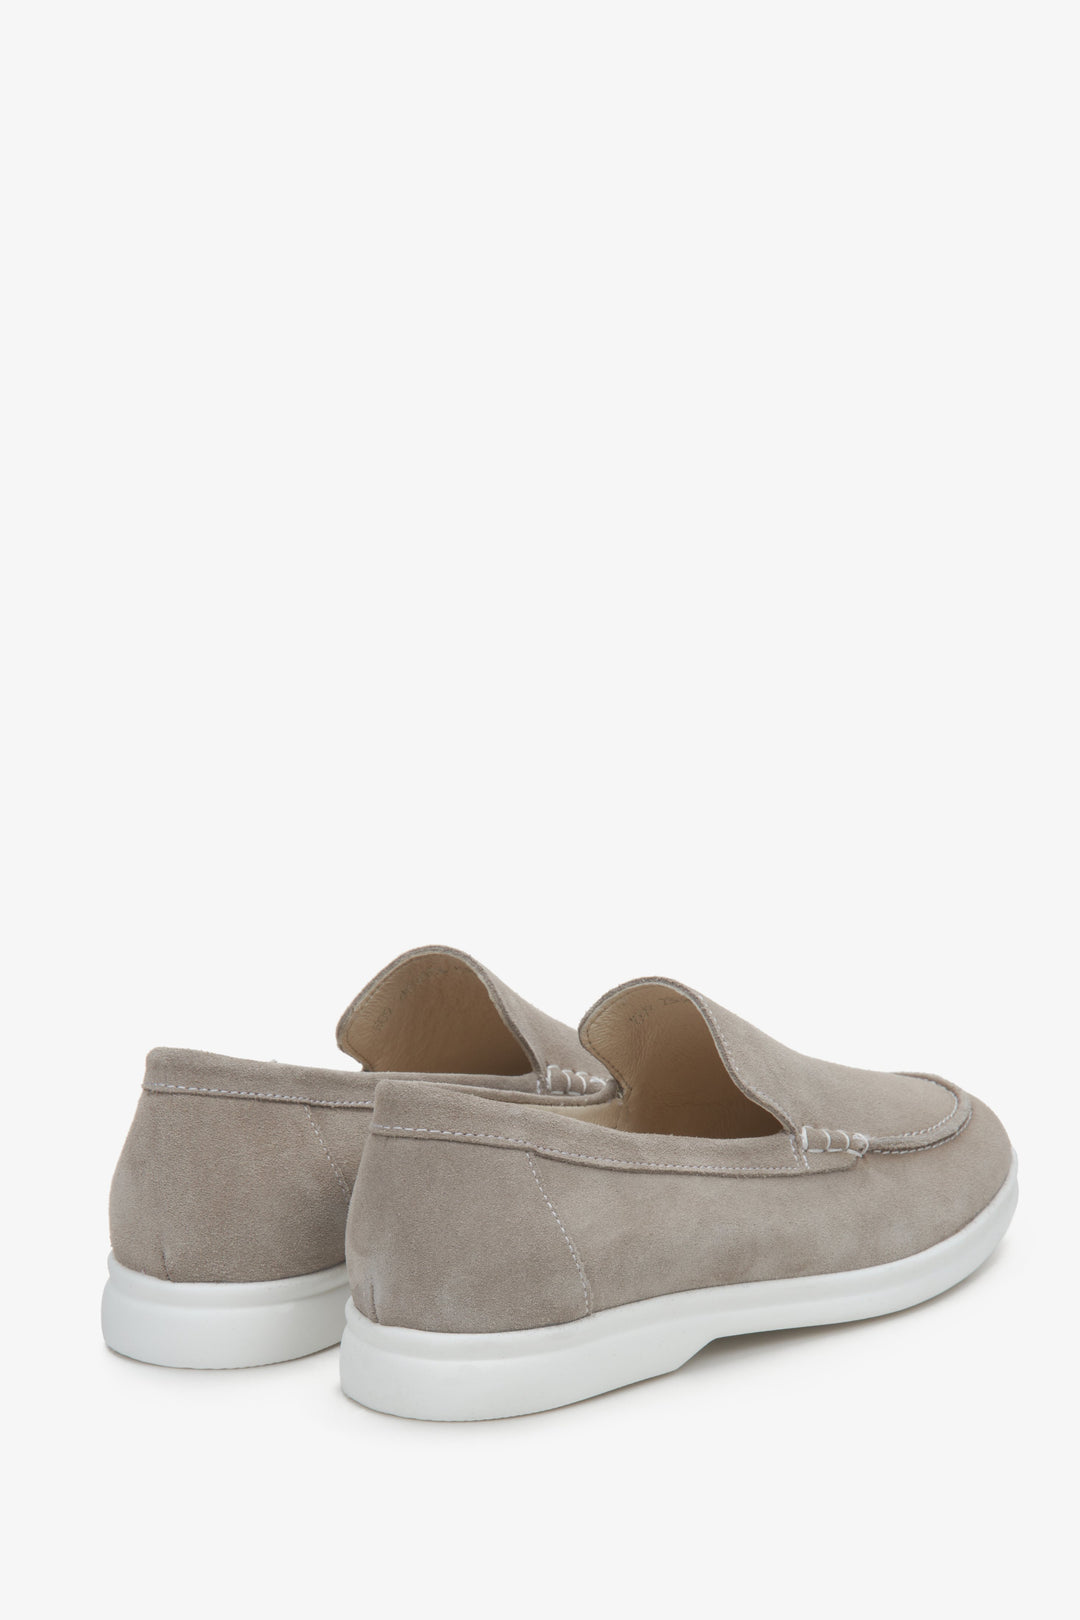 Women's suede moccasins in dark grey Estro - close-up of the heel and side seam of the shoes.